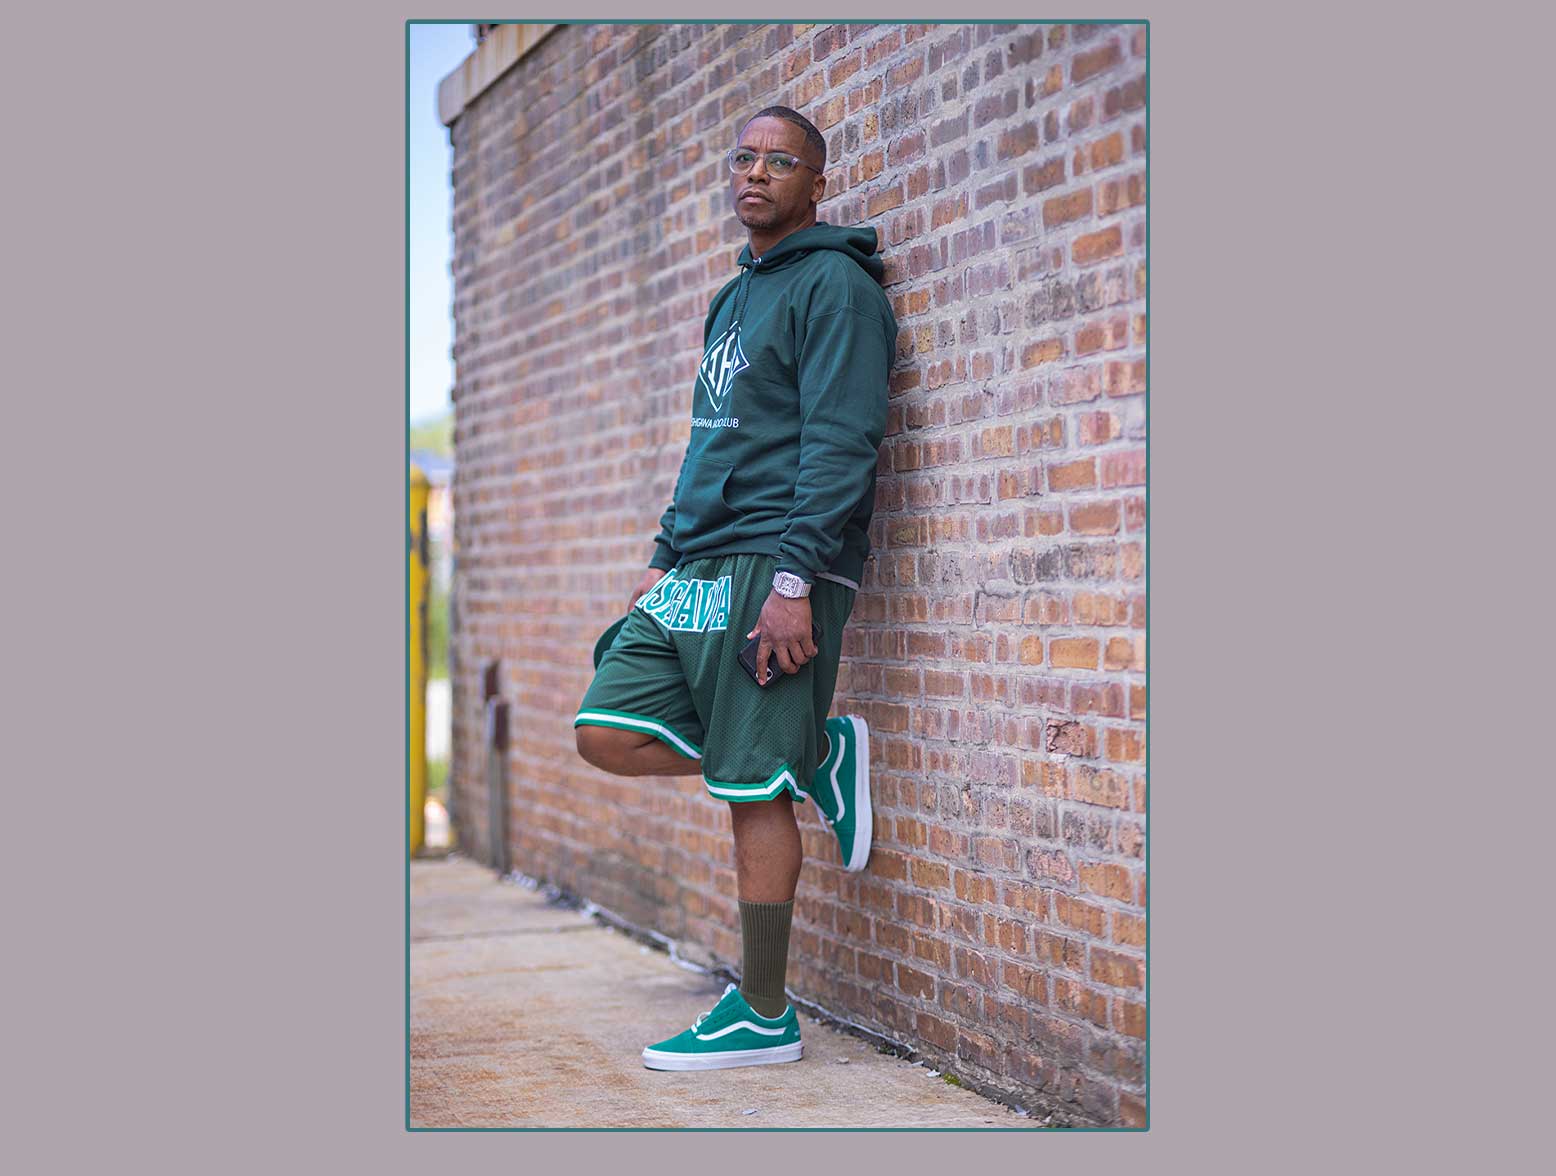 Lupe Fiasco leaning against brick wall in green sweatshirt and sneakers